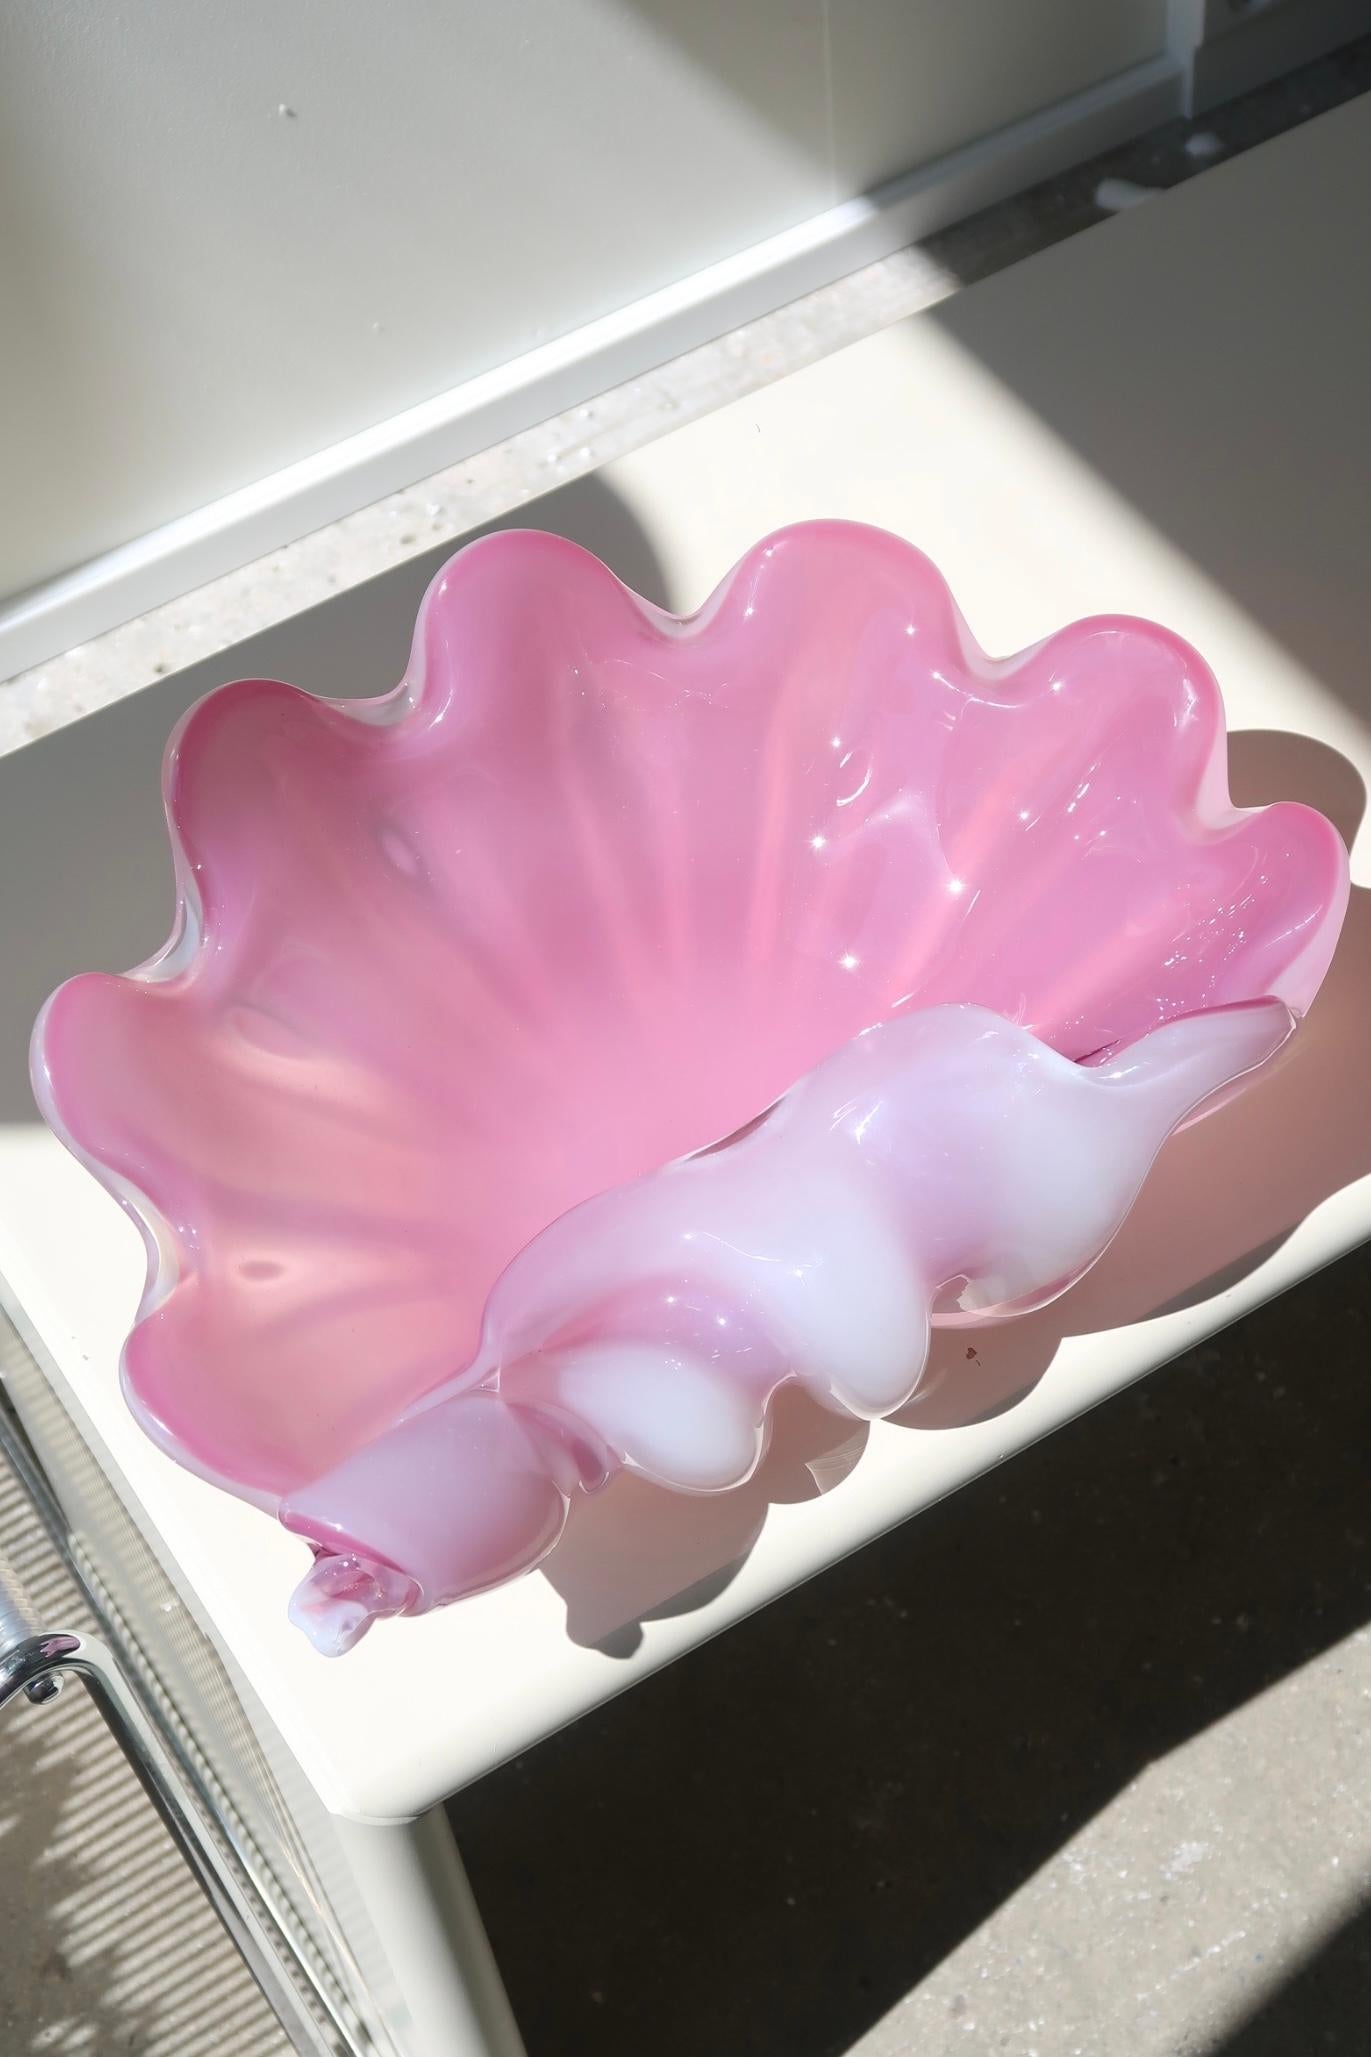 Huge vintage Murano clam bowl in bubble gum pink / pink alabaster glass. Mouth blown into a beautiful organic shape and a fantastic piece of craftsmanship. Handmade in Italy 1950s/60s.
L: 37 cm W: 26 cm H: 15 cm
Item 555.